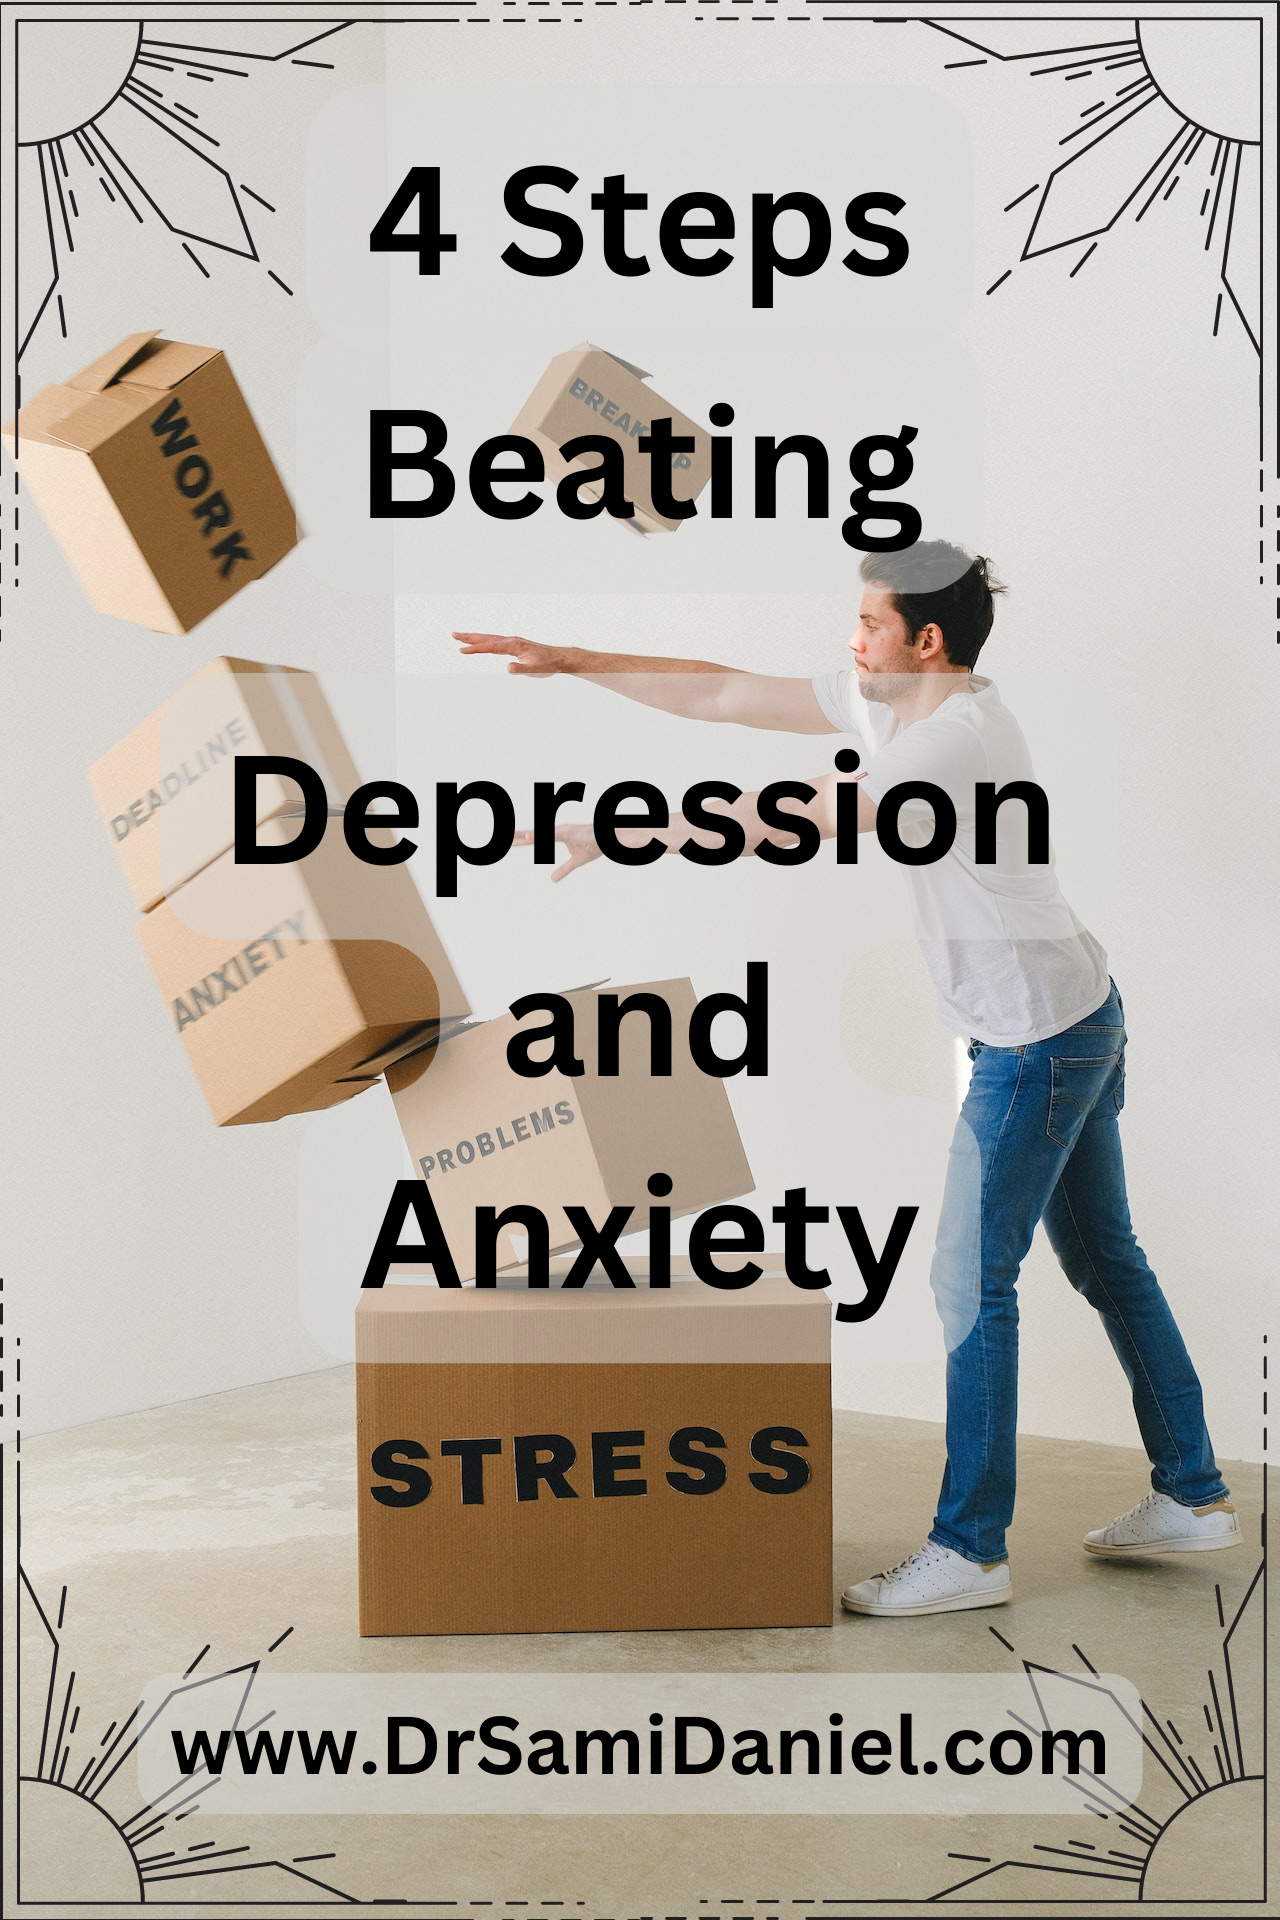 4 steps to beating depression and anxiety